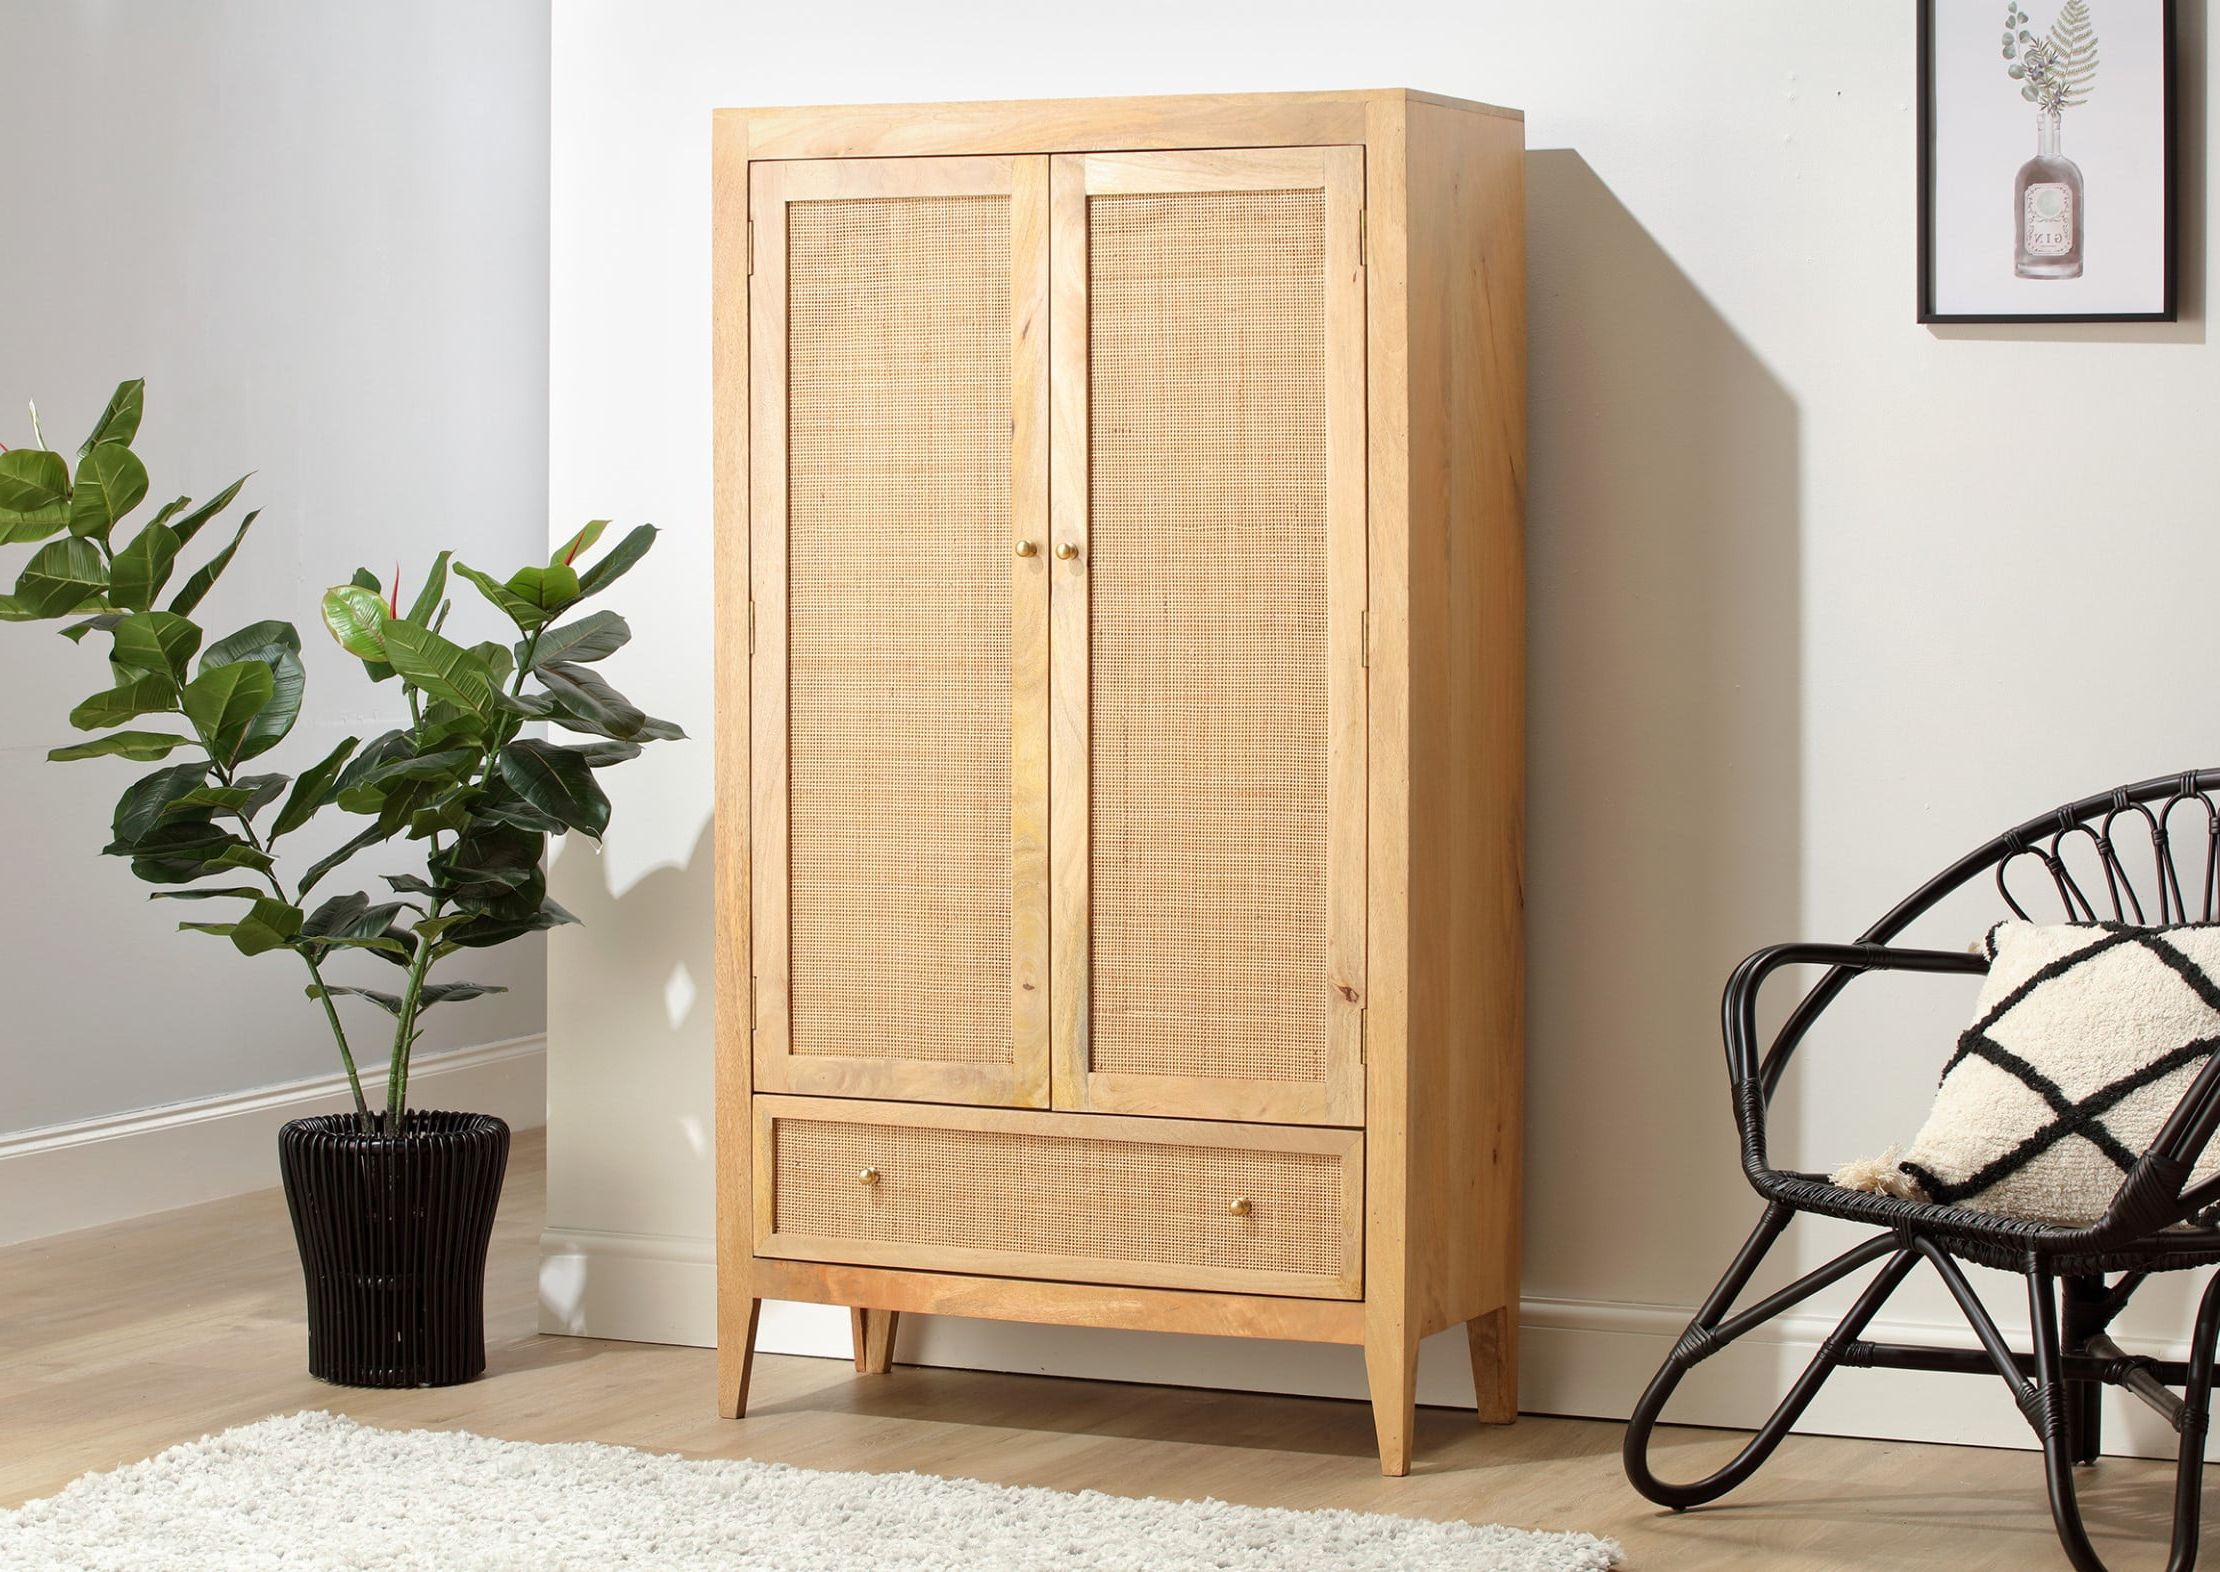 Venice Mango Wood Wardrobe With Natural Rattan | Eco Friendly And  Sustainable Furniture Regarding Wicker Armoire Wardrobes (Gallery 14 of 20)